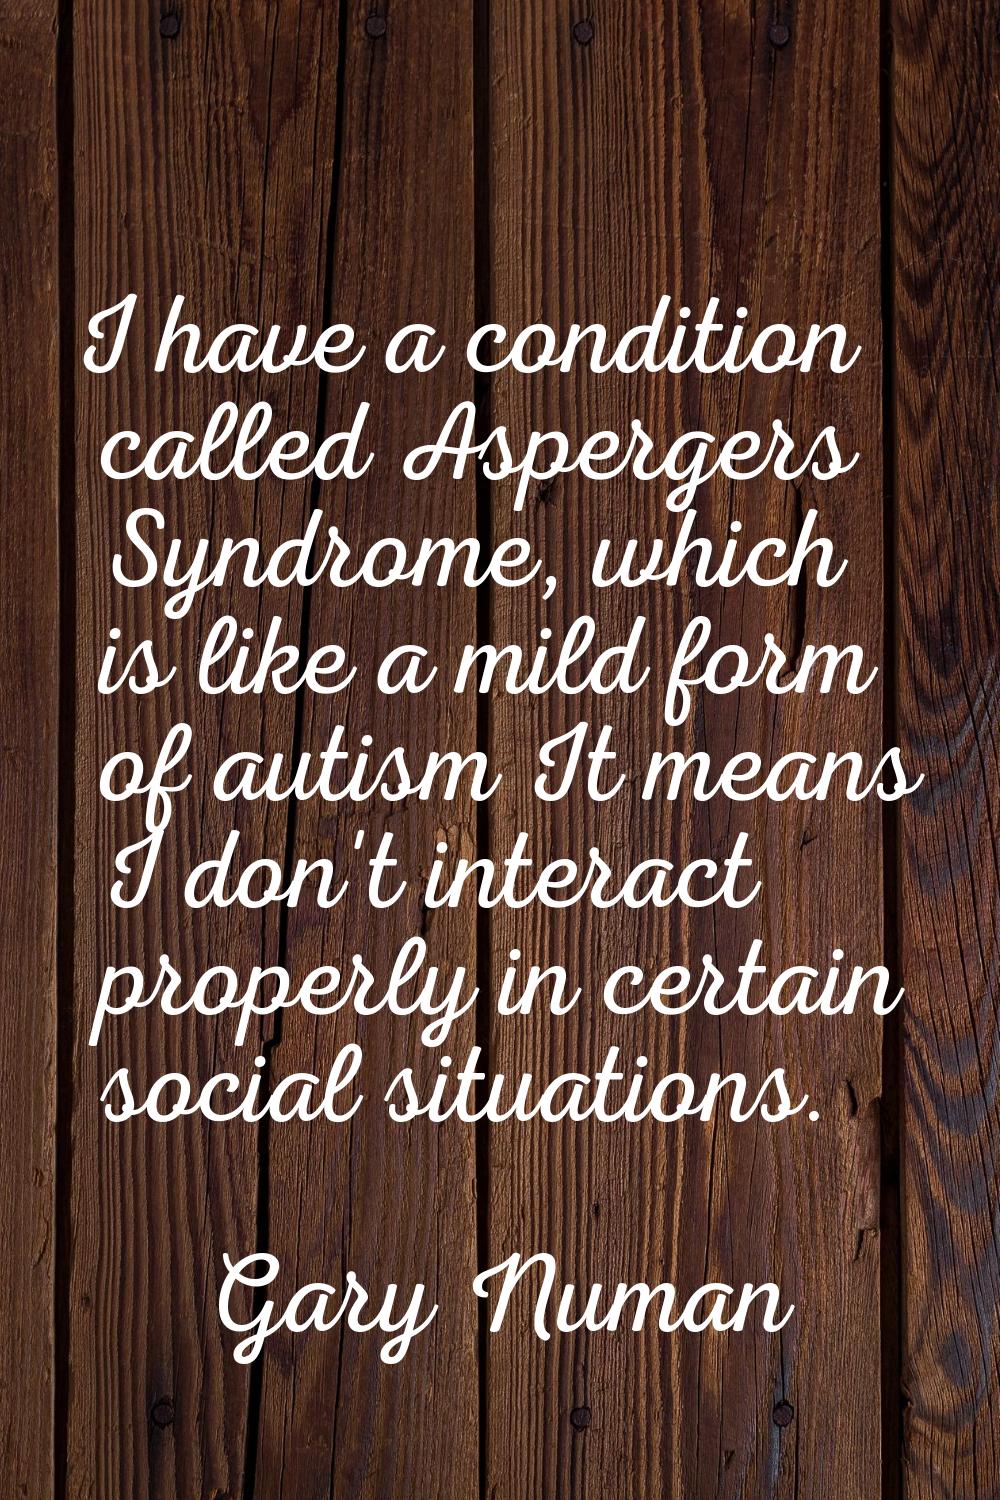 I have a condition called Aspergers Syndrome, which is like a mild form of autism It means I don't 